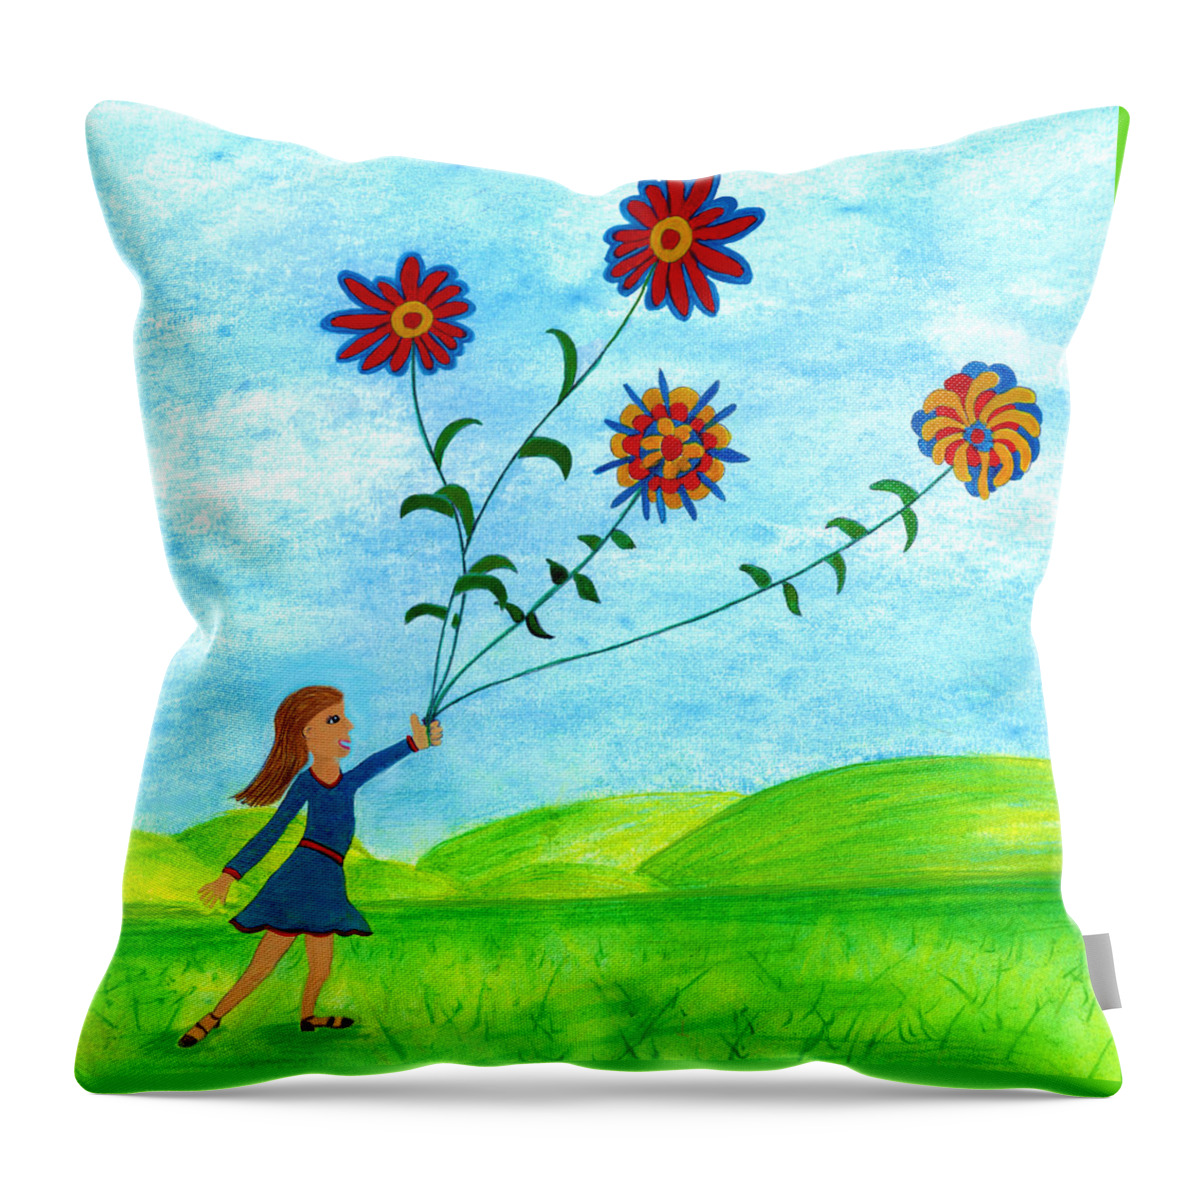 Landscape Throw Pillow featuring the digital art Girl With Flowers by Christina Wedberg